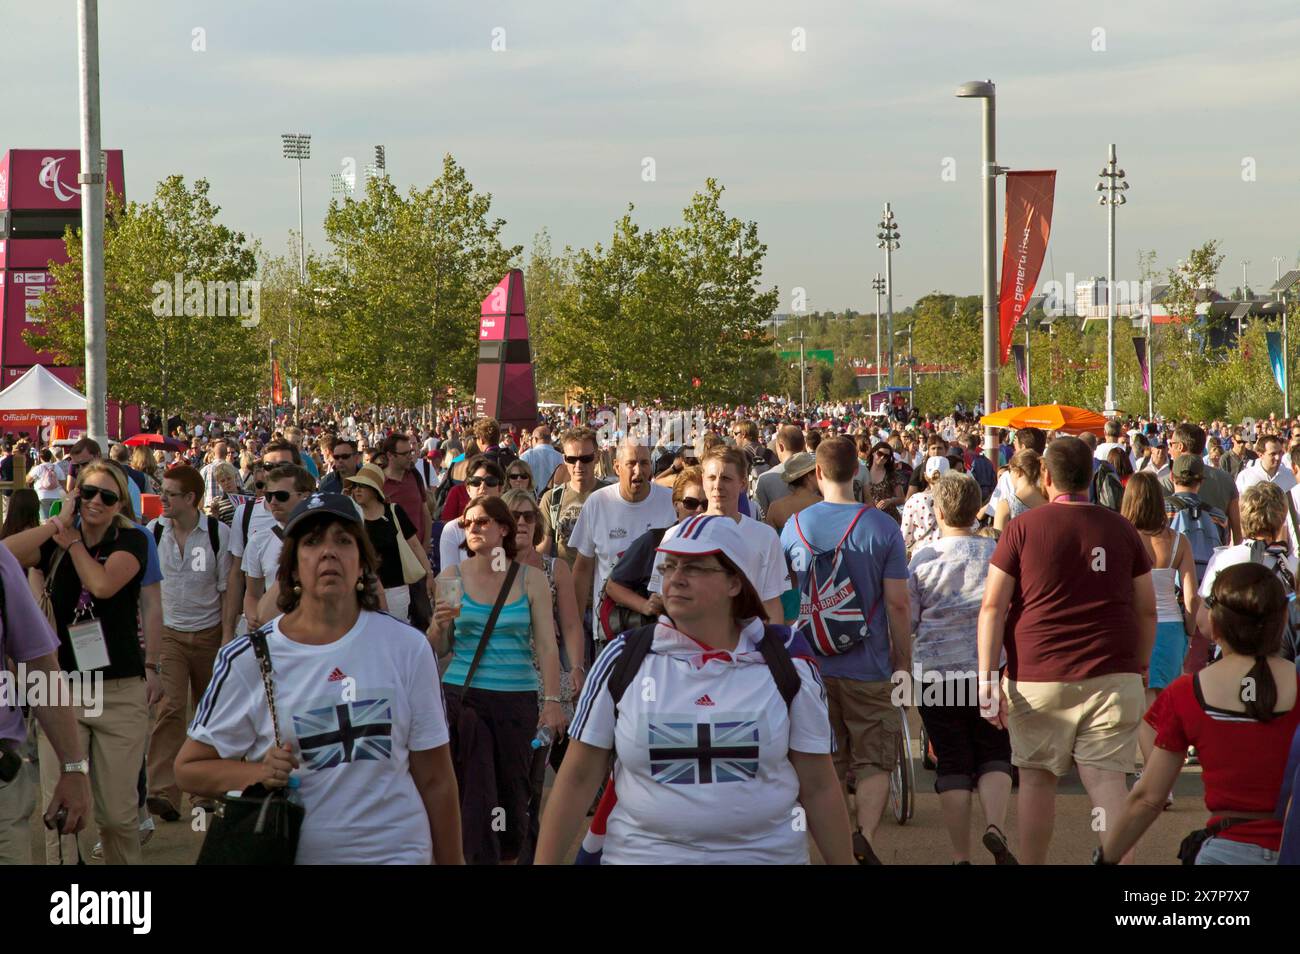 The Queen Elizabeth Olympic Park, packed with spectators during the 2012 London Paralympics, Stratford. Stock Photo